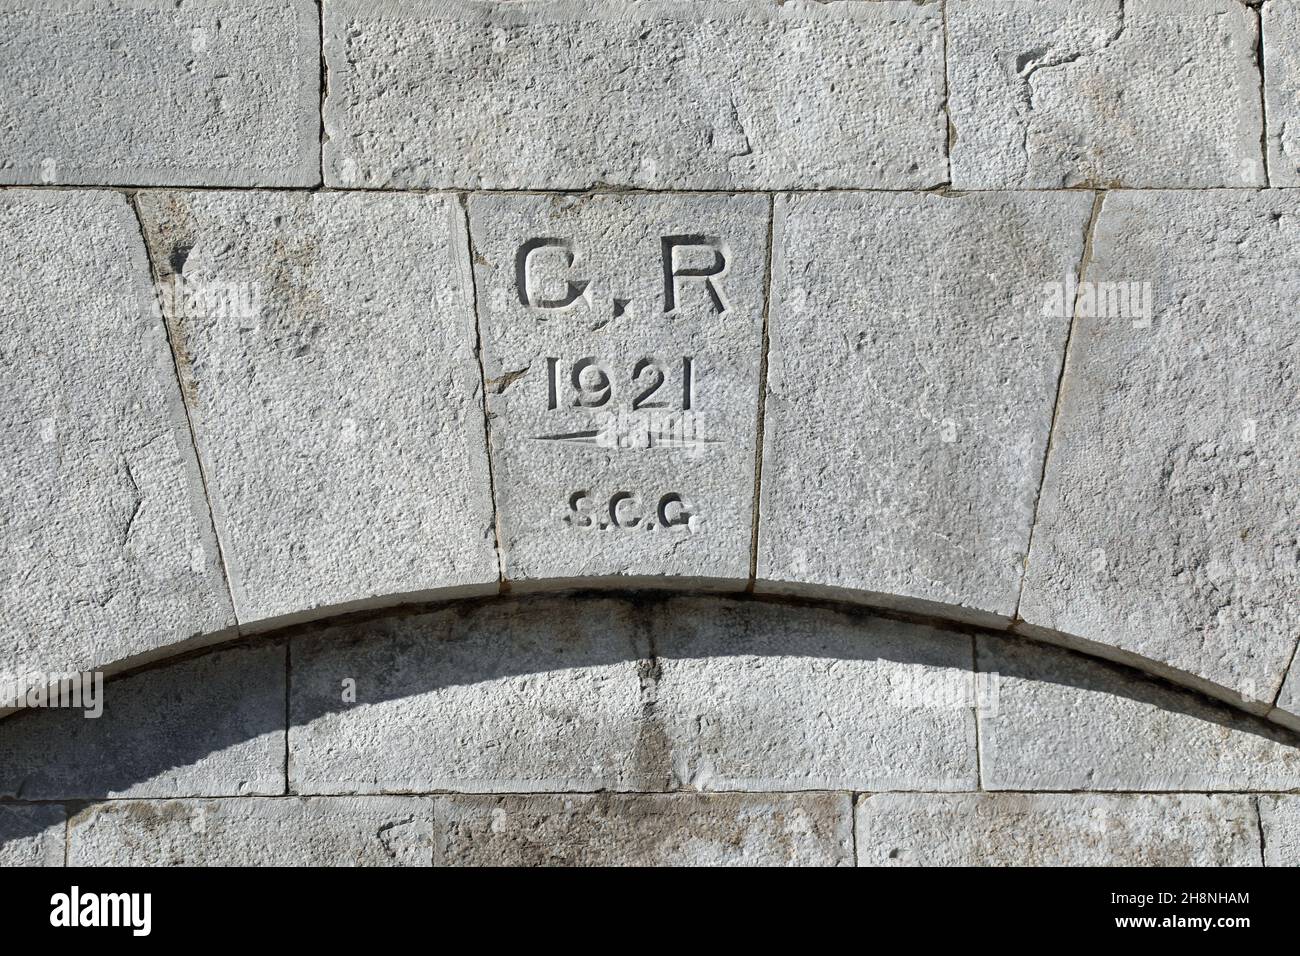 G R 1921 date stone at the Ragged Staff Gates in Gibraltar Stock Photo